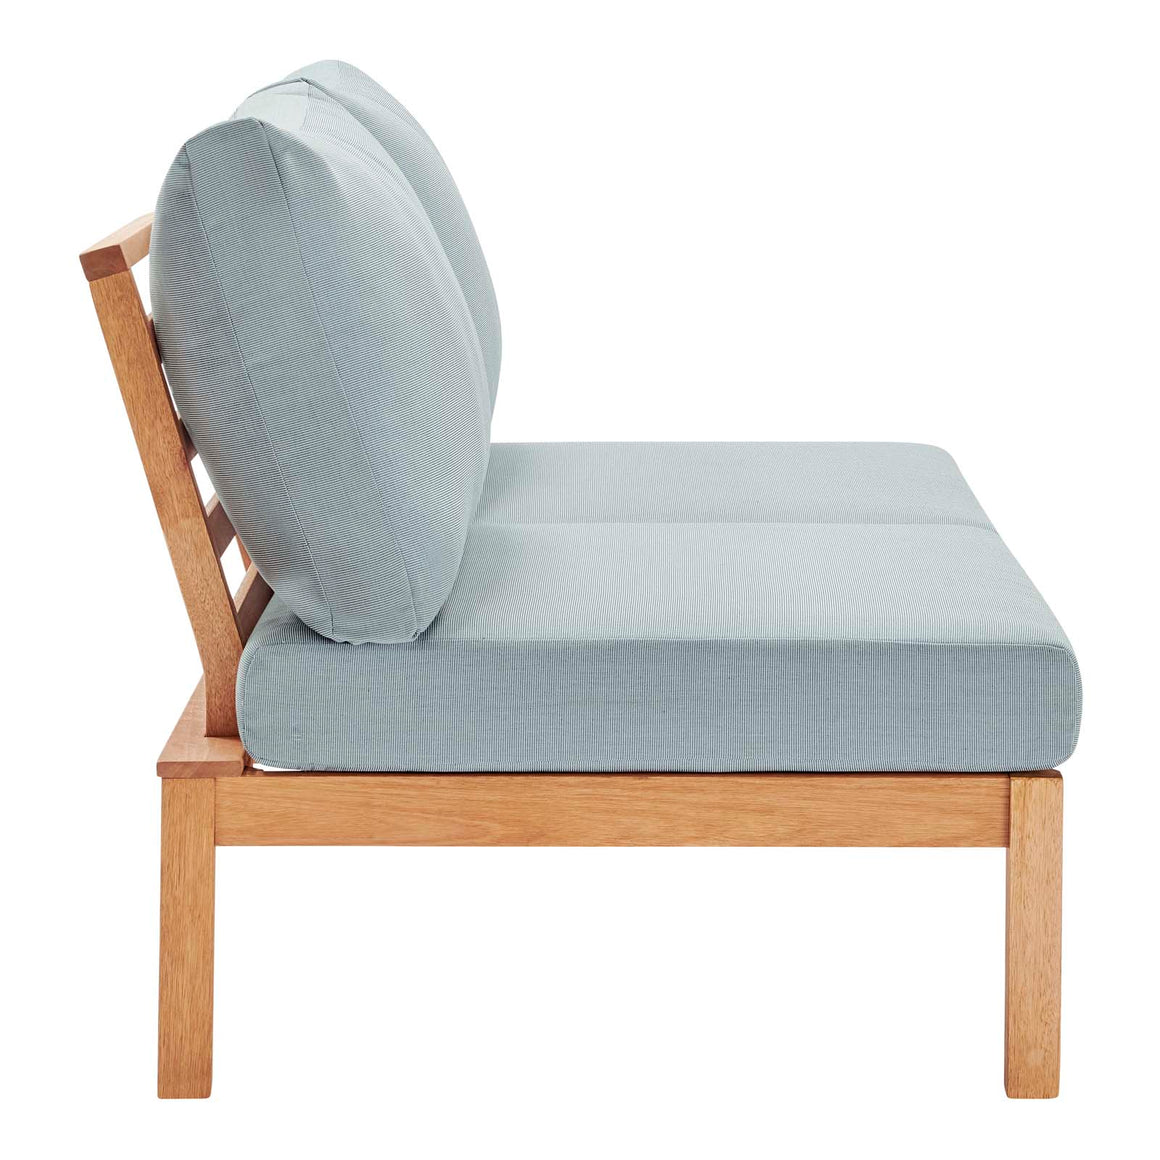 Freeport Karri Wood Outdoor Patio Loveseat with Right-Facing Side End Table Natural Light Blue